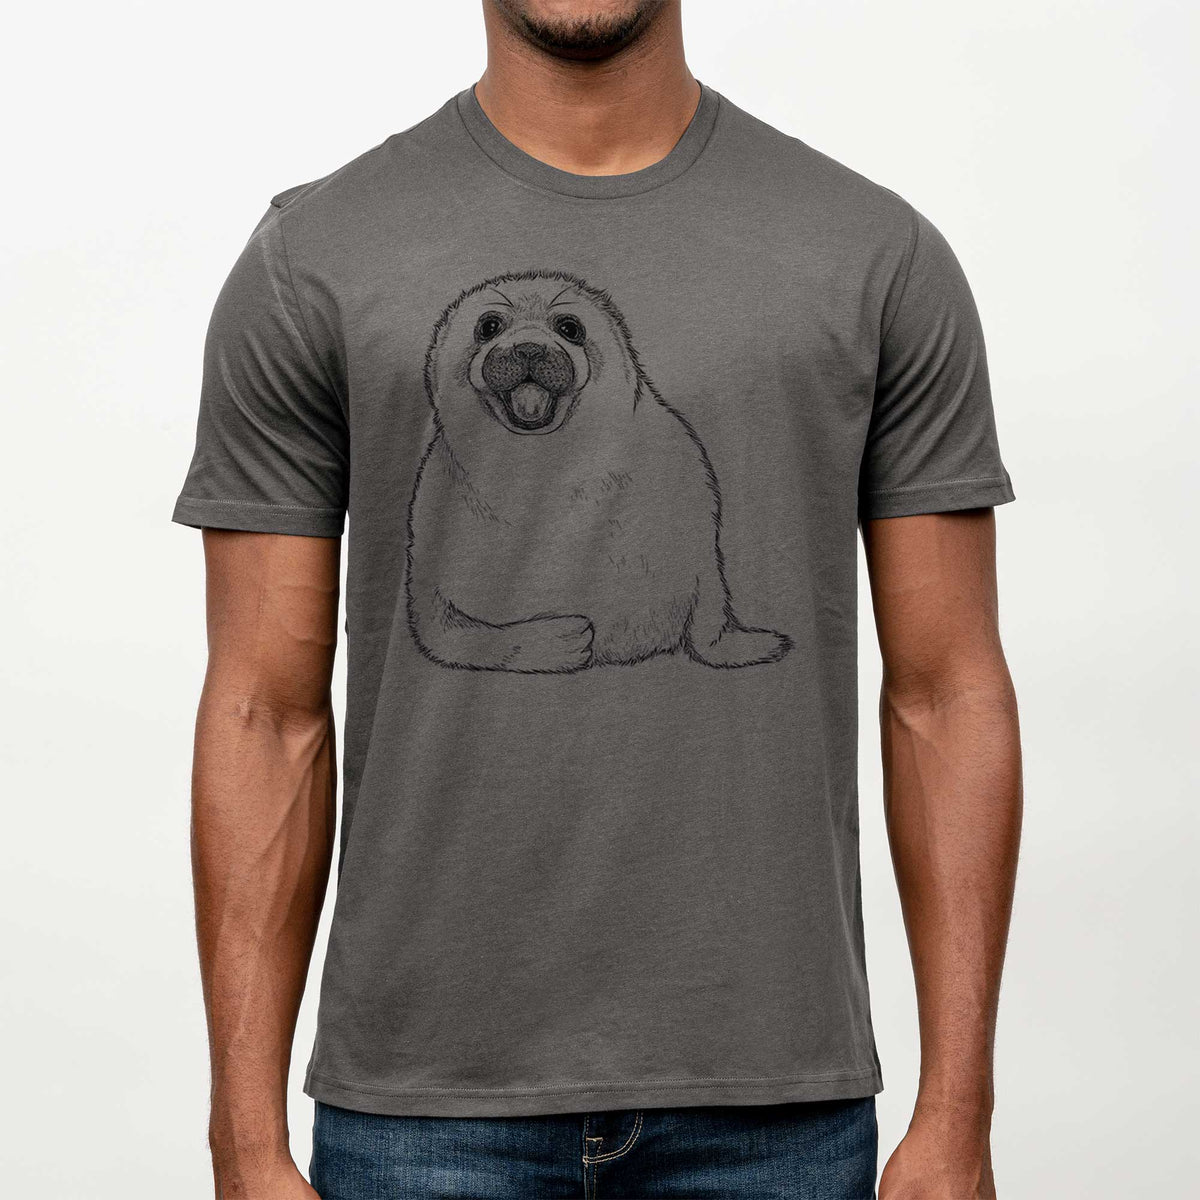 Harp Seal Pup - Pagophilus groenlandicus -  Mineral Wash 100% Organic Cotton Short Sleeve